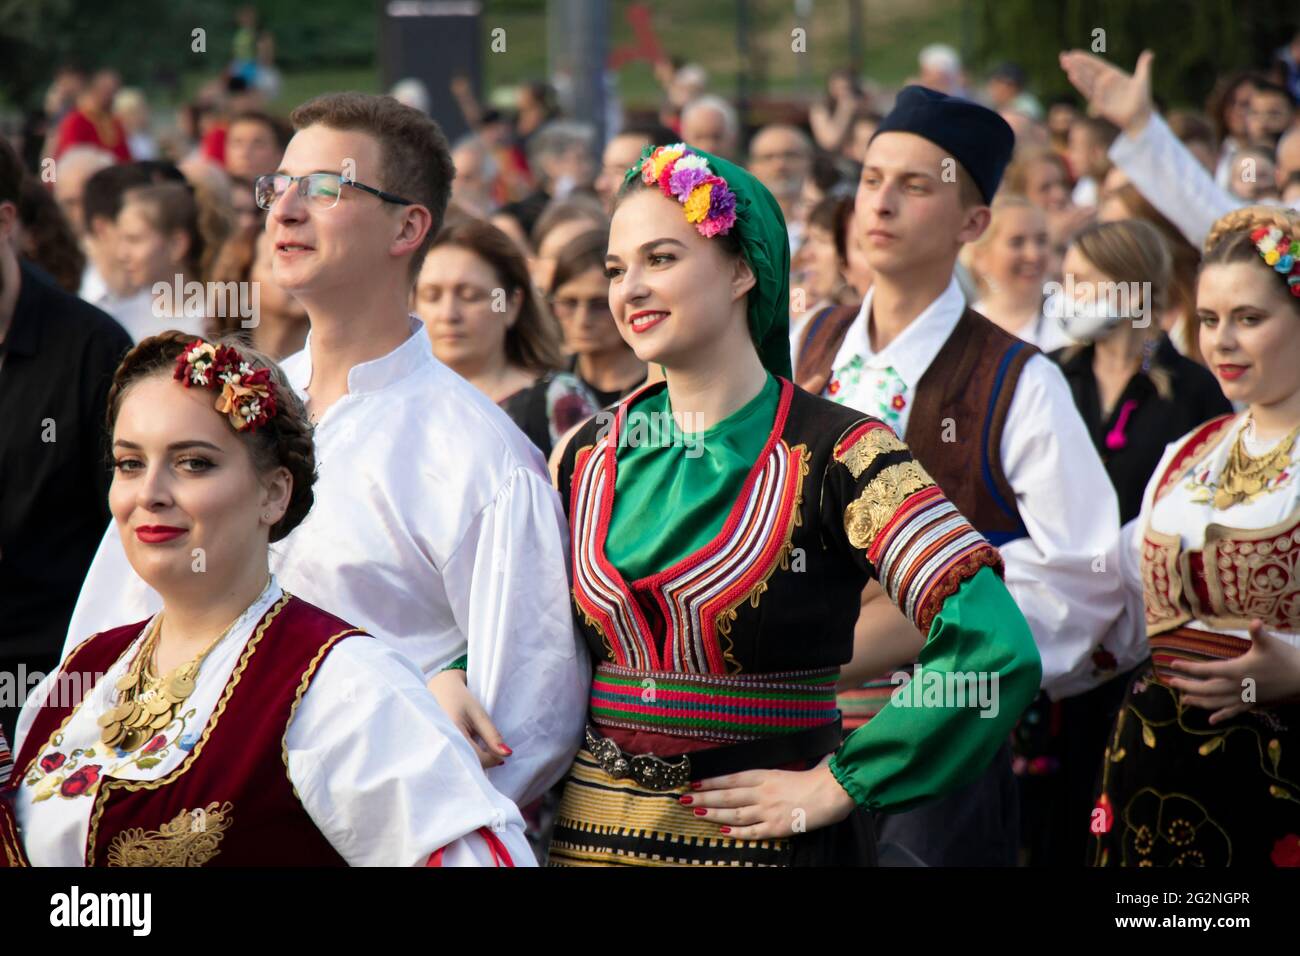 Belgrade, Serbia - June 10, 2021: Young people folk dancers wearing traditional costumes participate in religious procession  to celebrate Belgrade’s Stock Photo